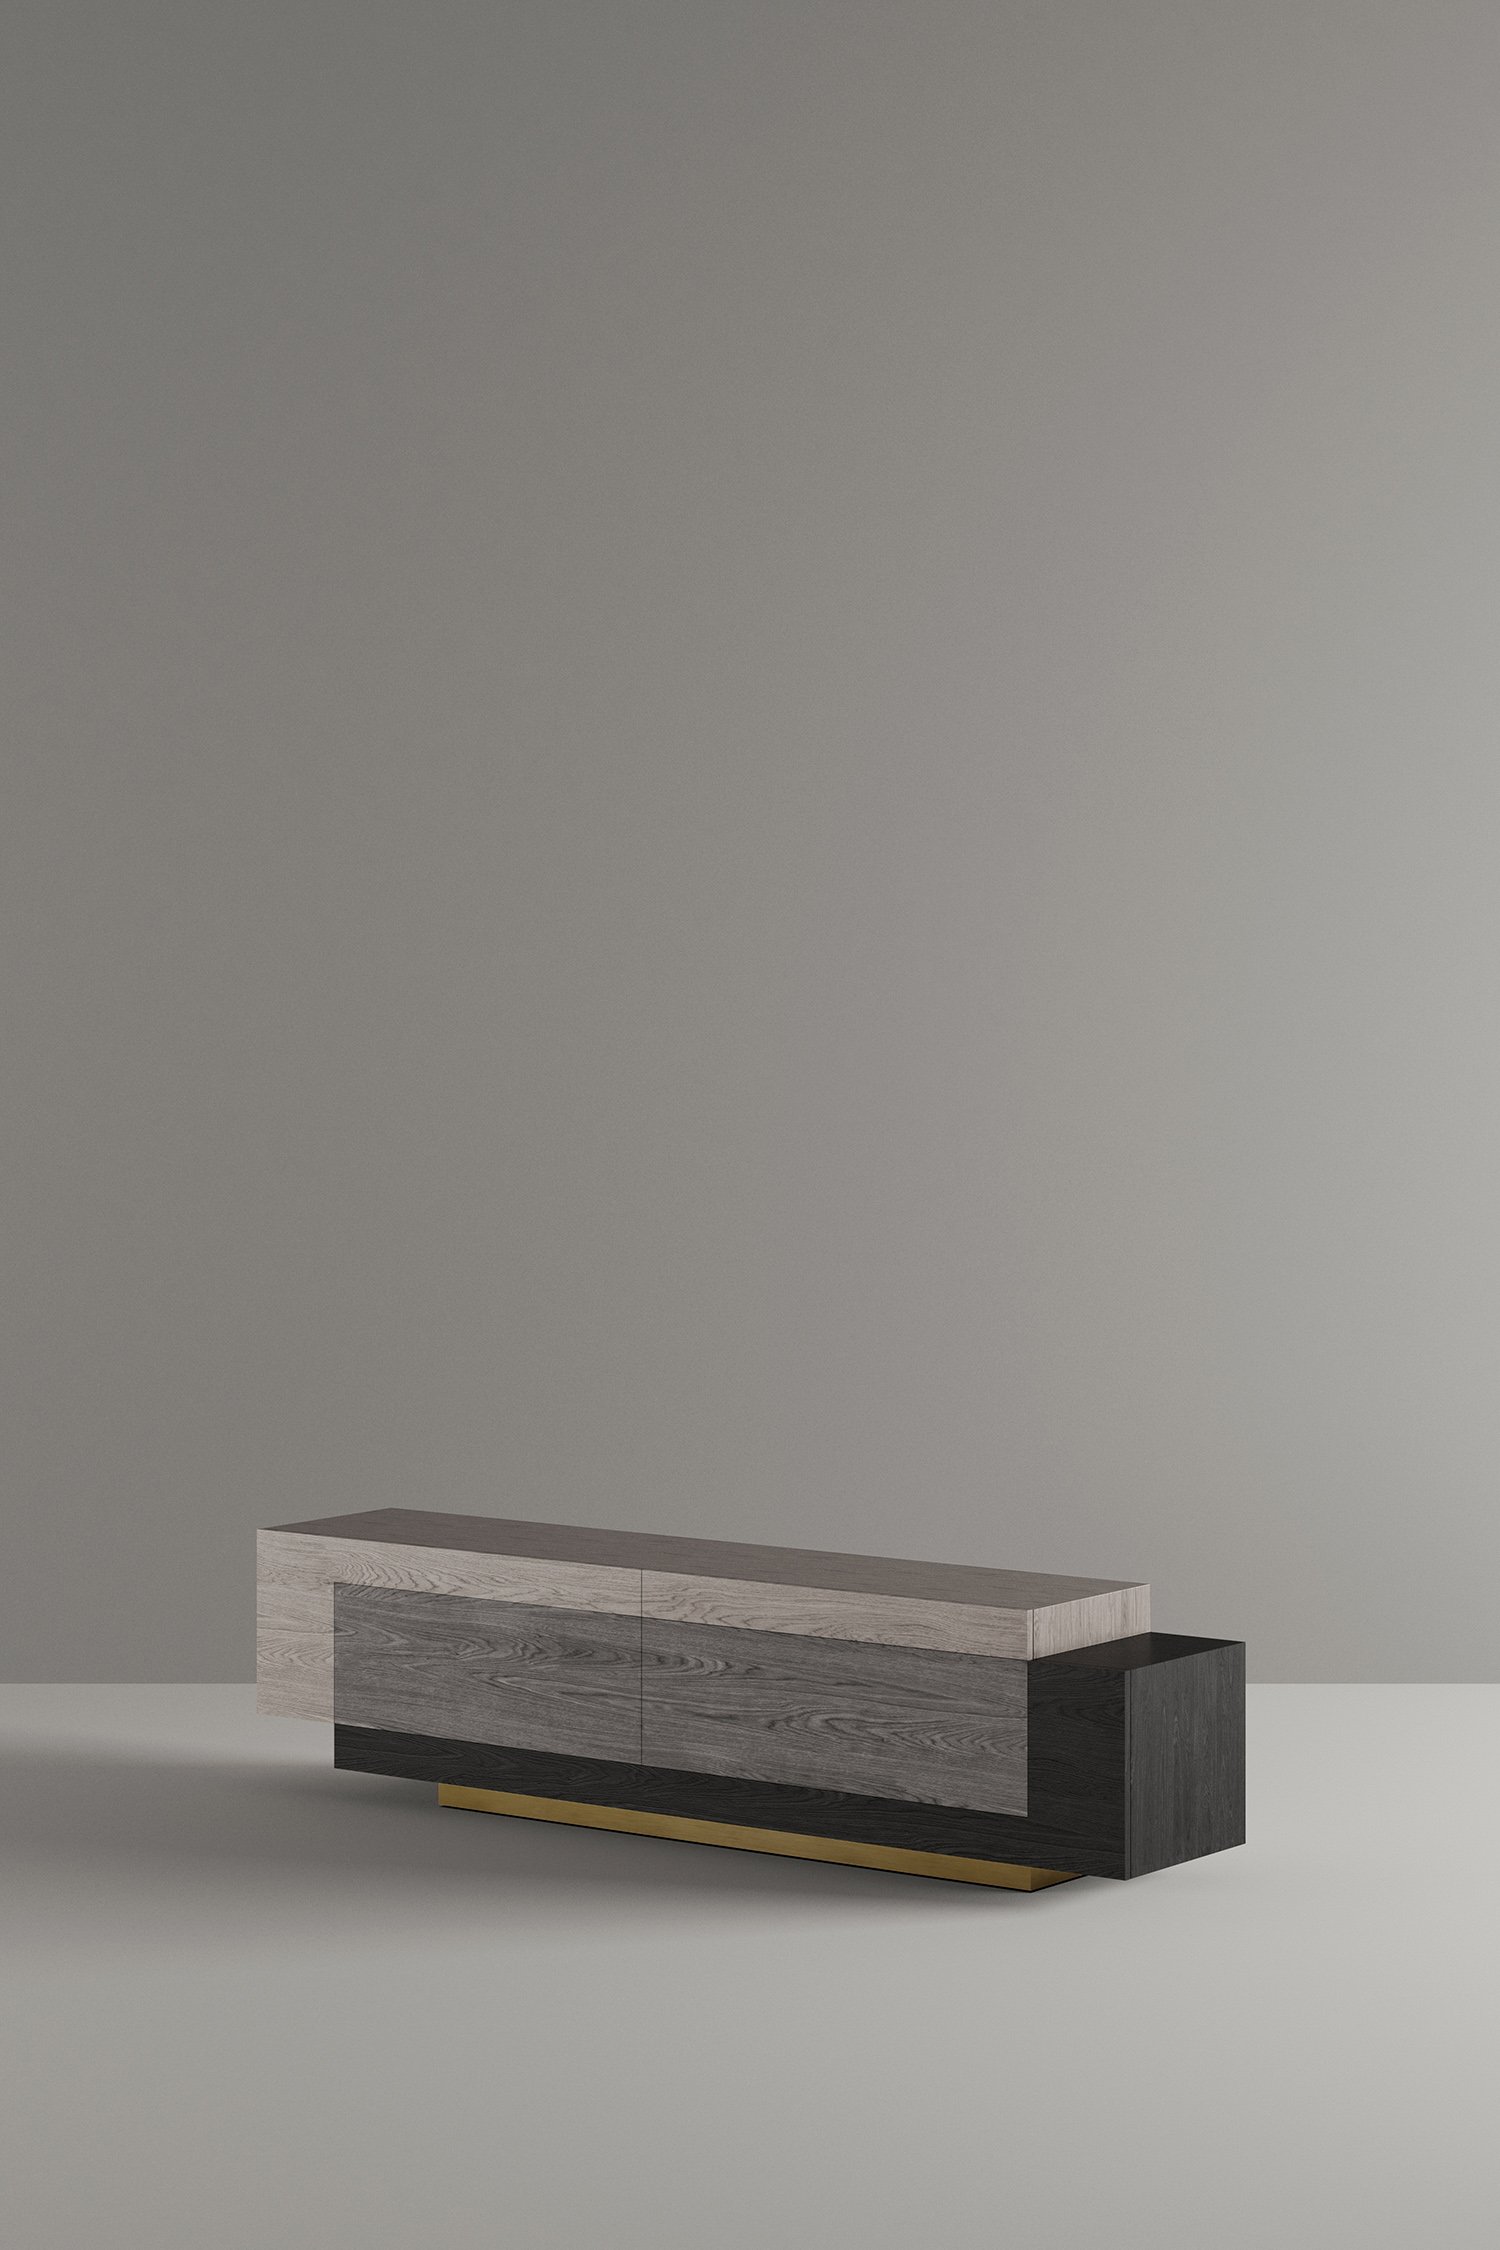 Booleanos TV Stand in gray wood by Joel Escalona.jpg